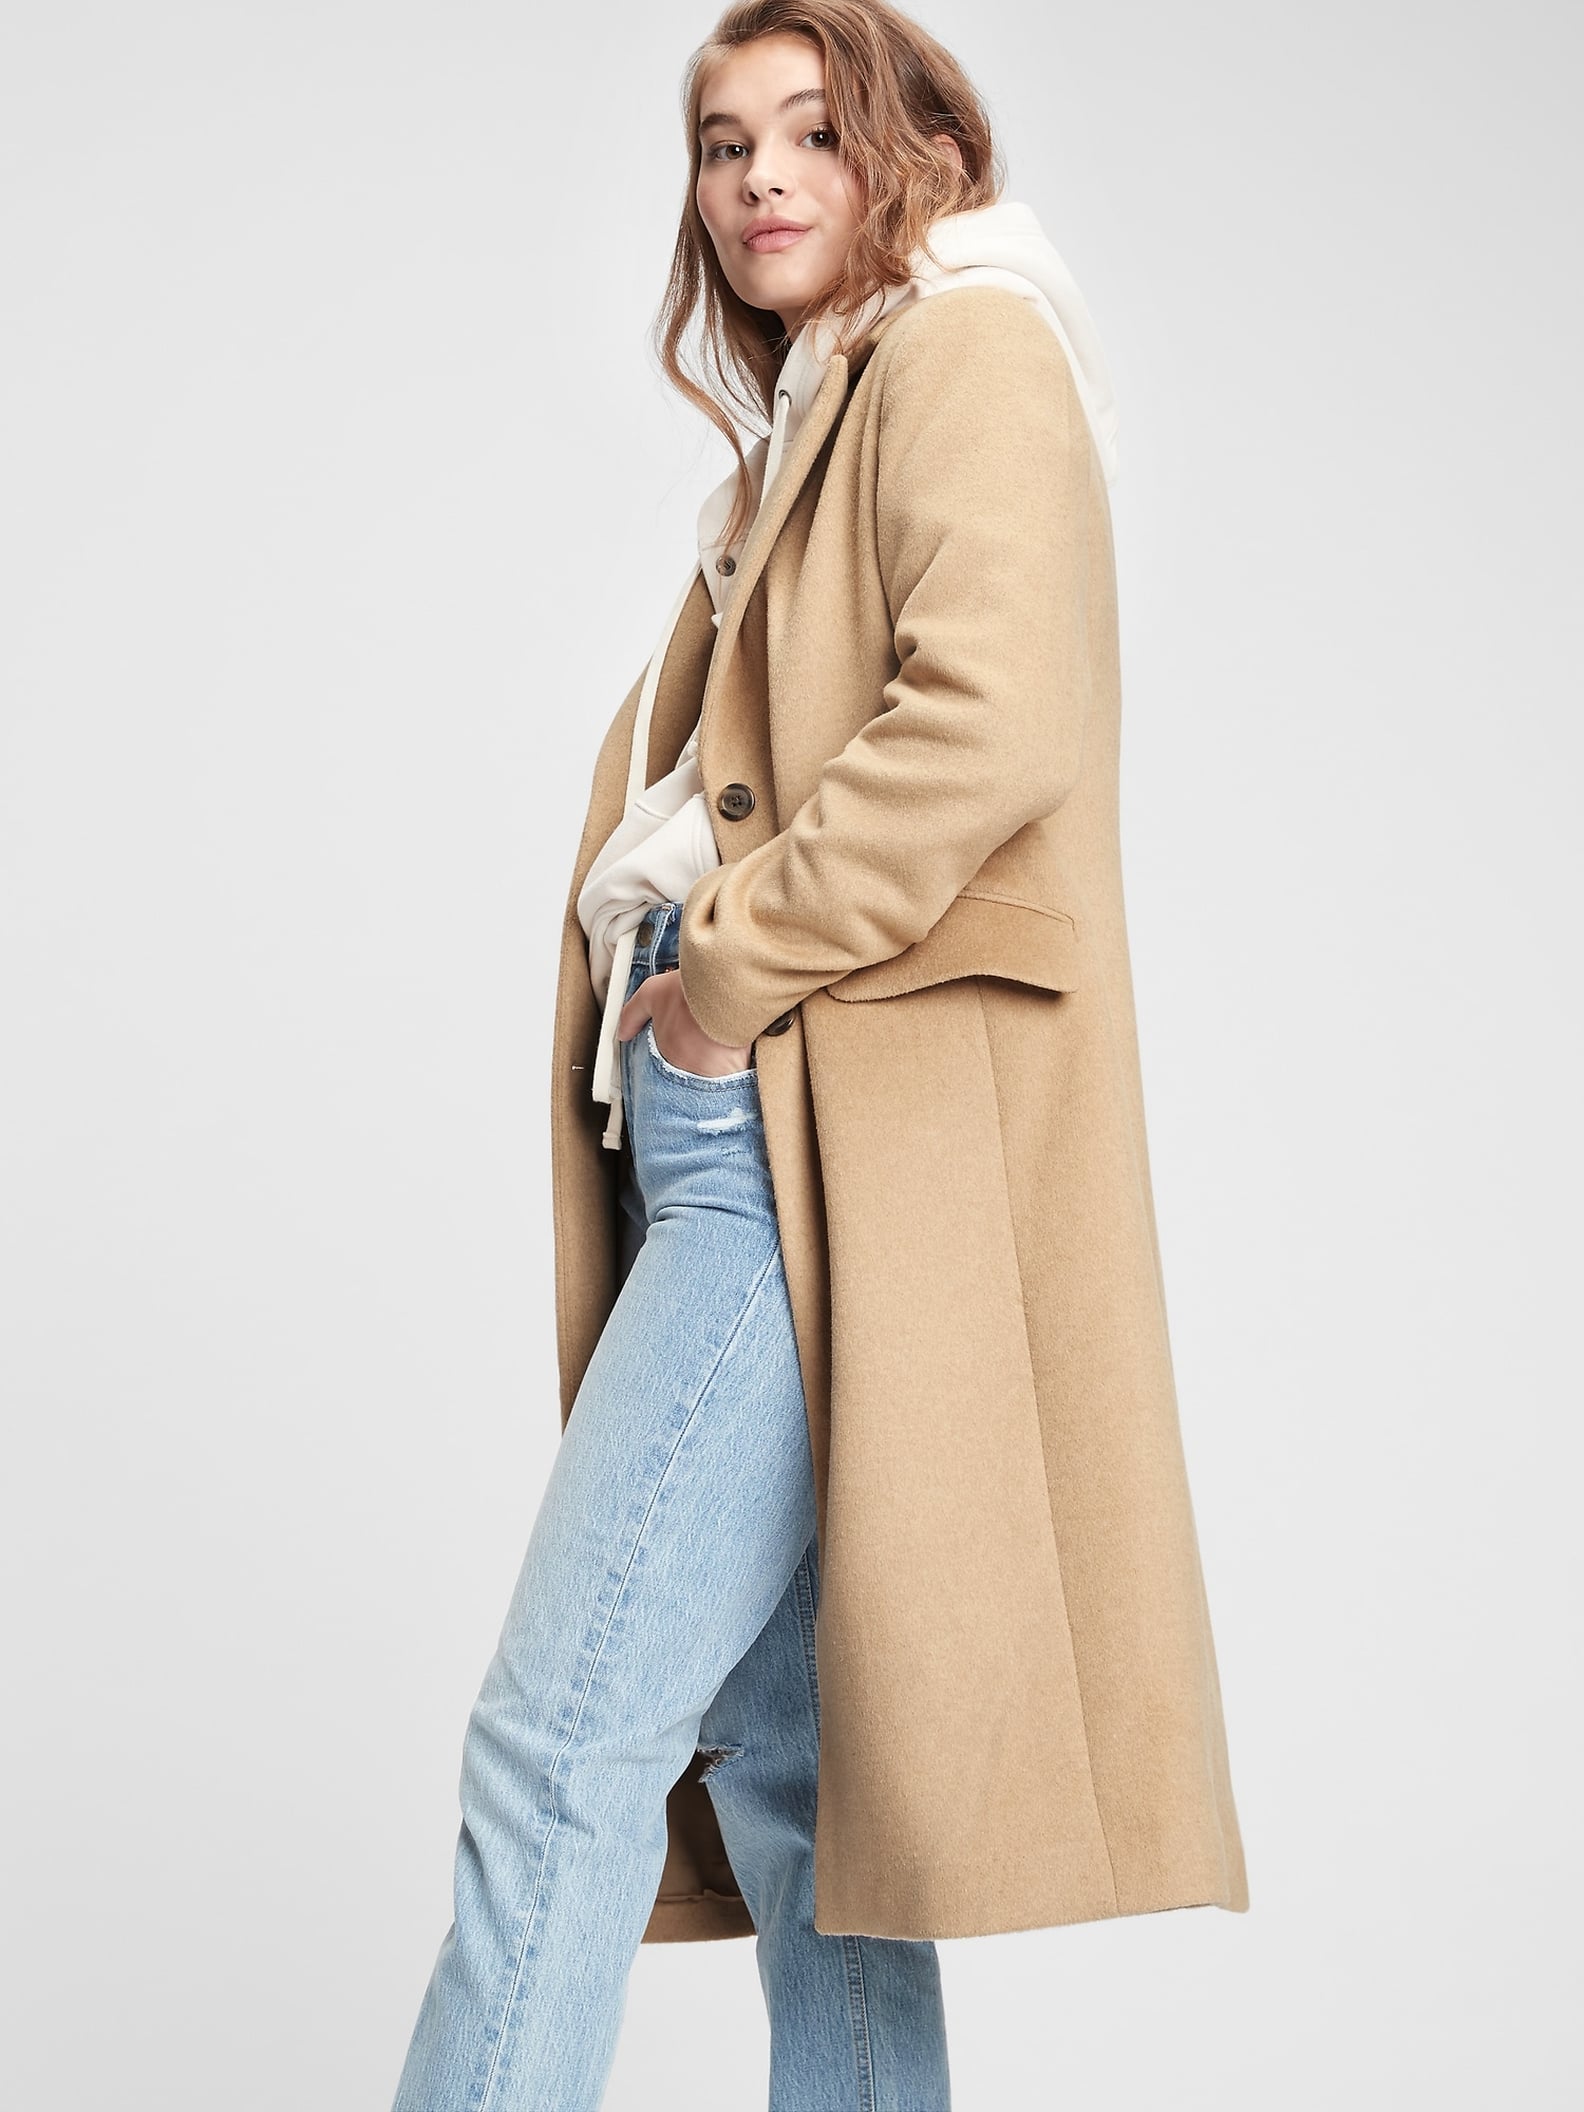 Best Coats and Jackets For Women From Gap | POPSUGAR Fashion